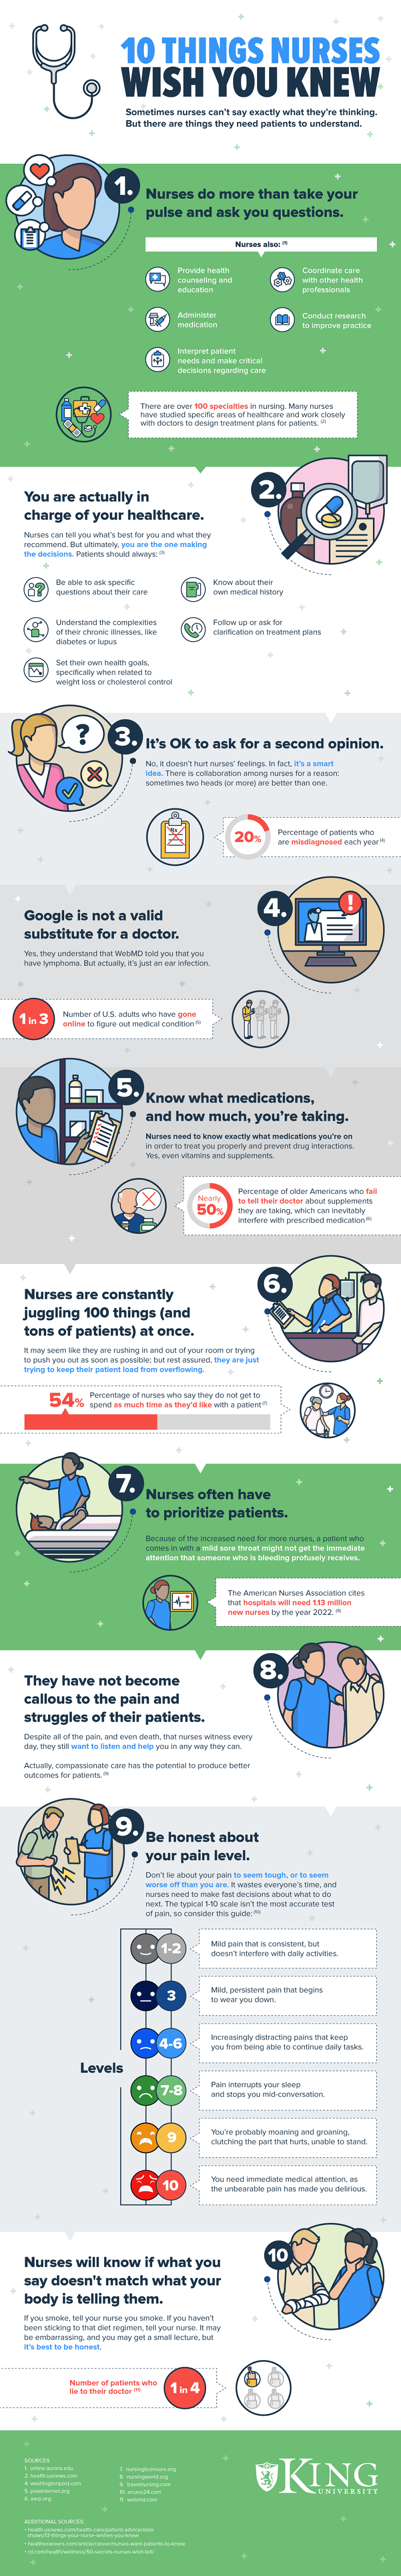 10 Things Nurses Wish You Knew #infographic